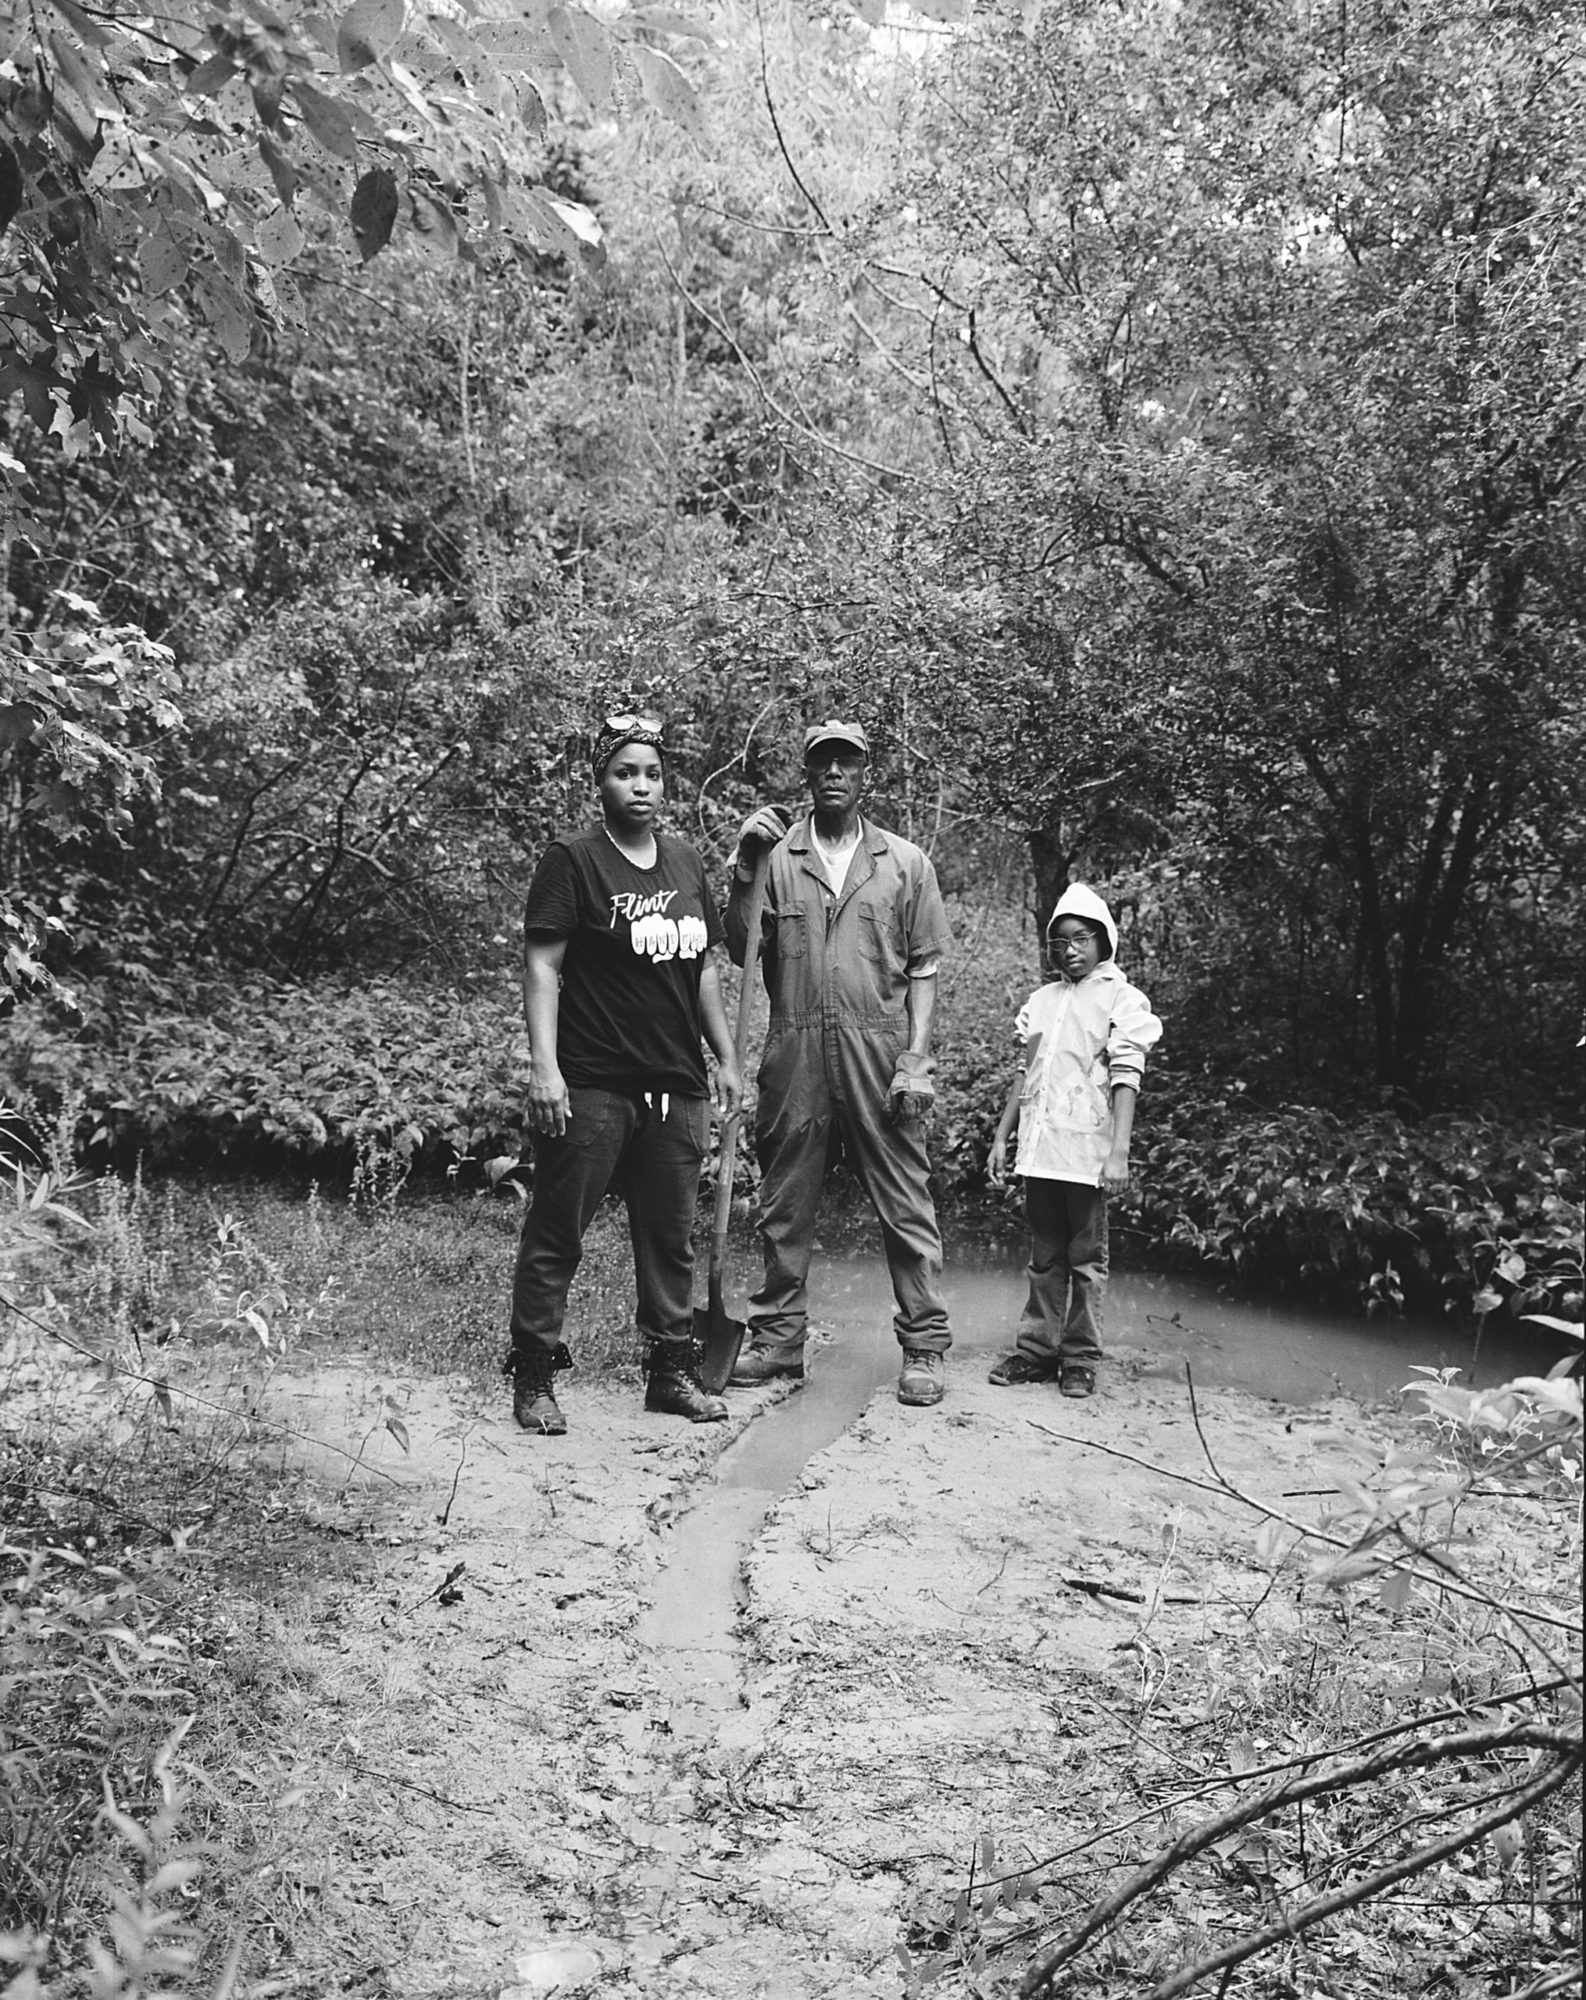 A black and white family portrait containing three generations; grandfather, daughter, grandaughter stand almost defiantly in center frame among trees and next to a freshwater spring